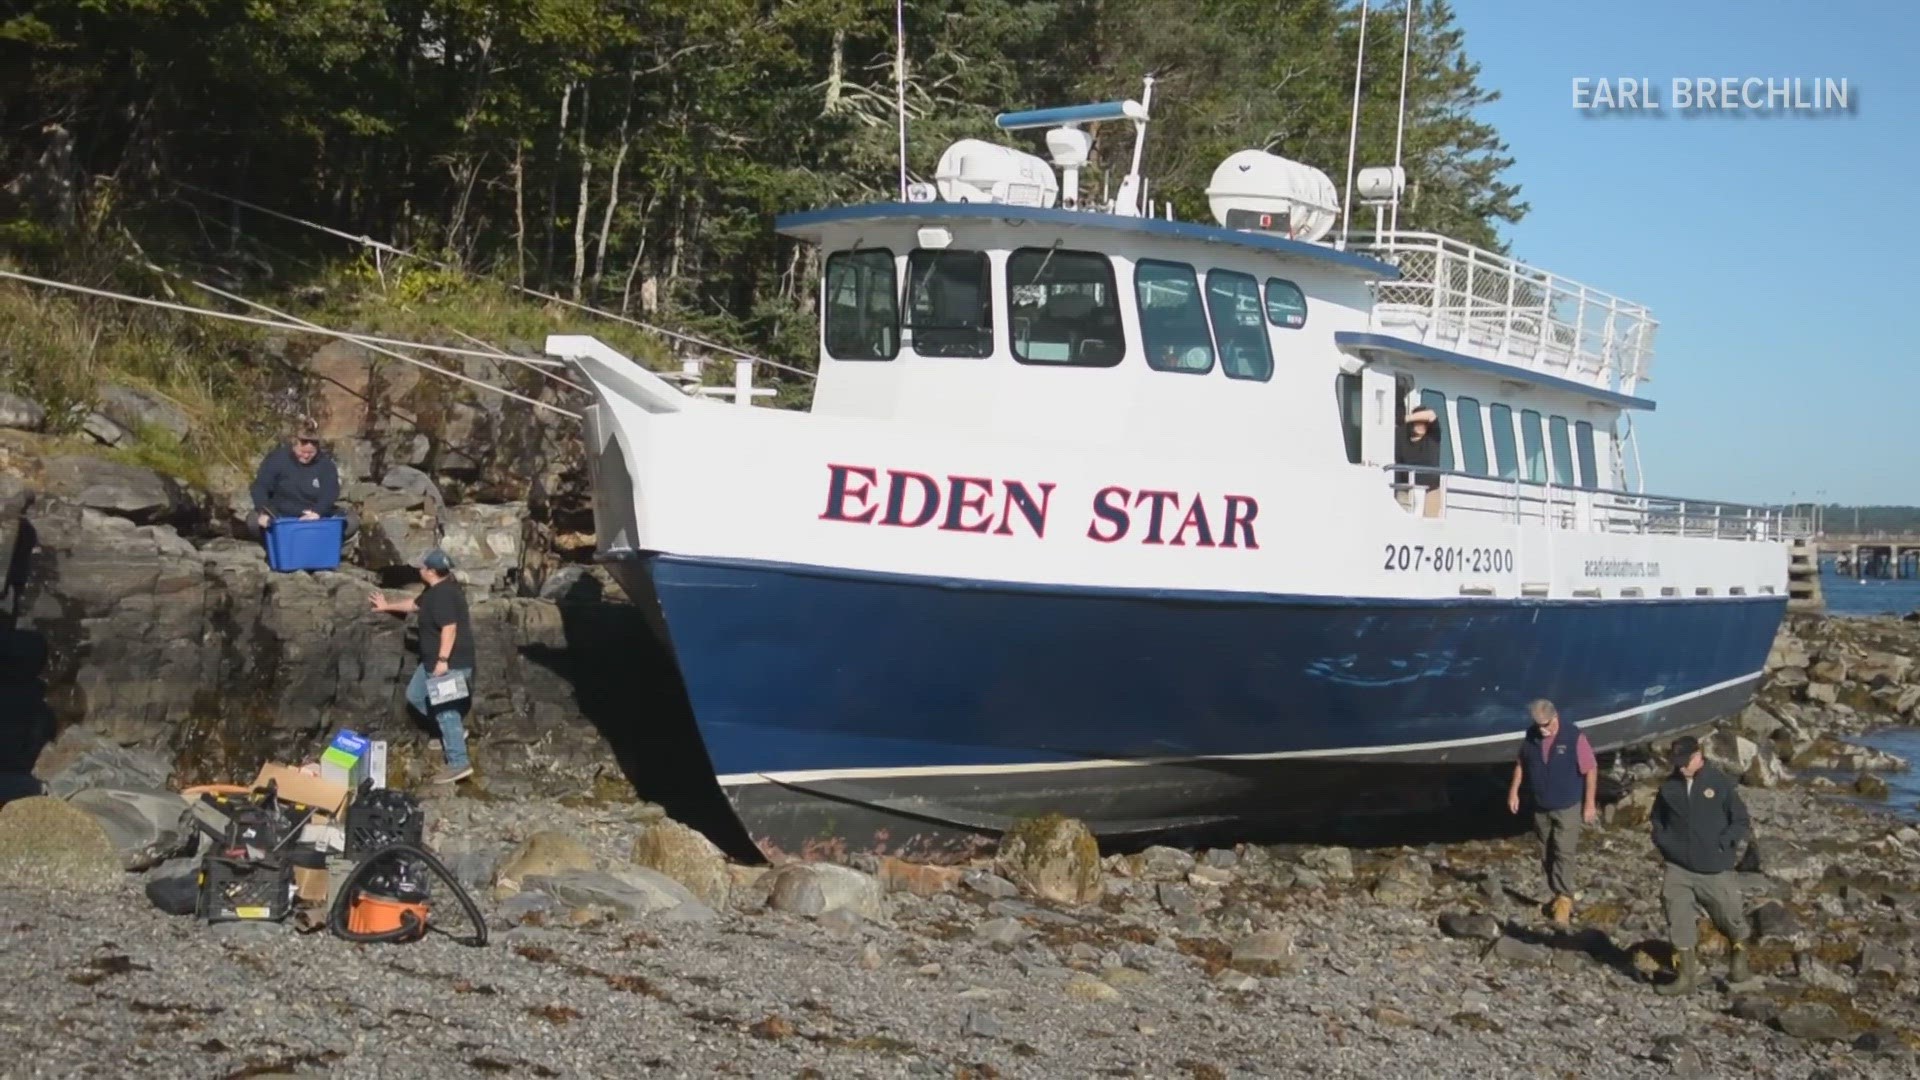 In Bar Harbor, a whale watch vessel broke free of its mooring and crashed ashore Saturday.